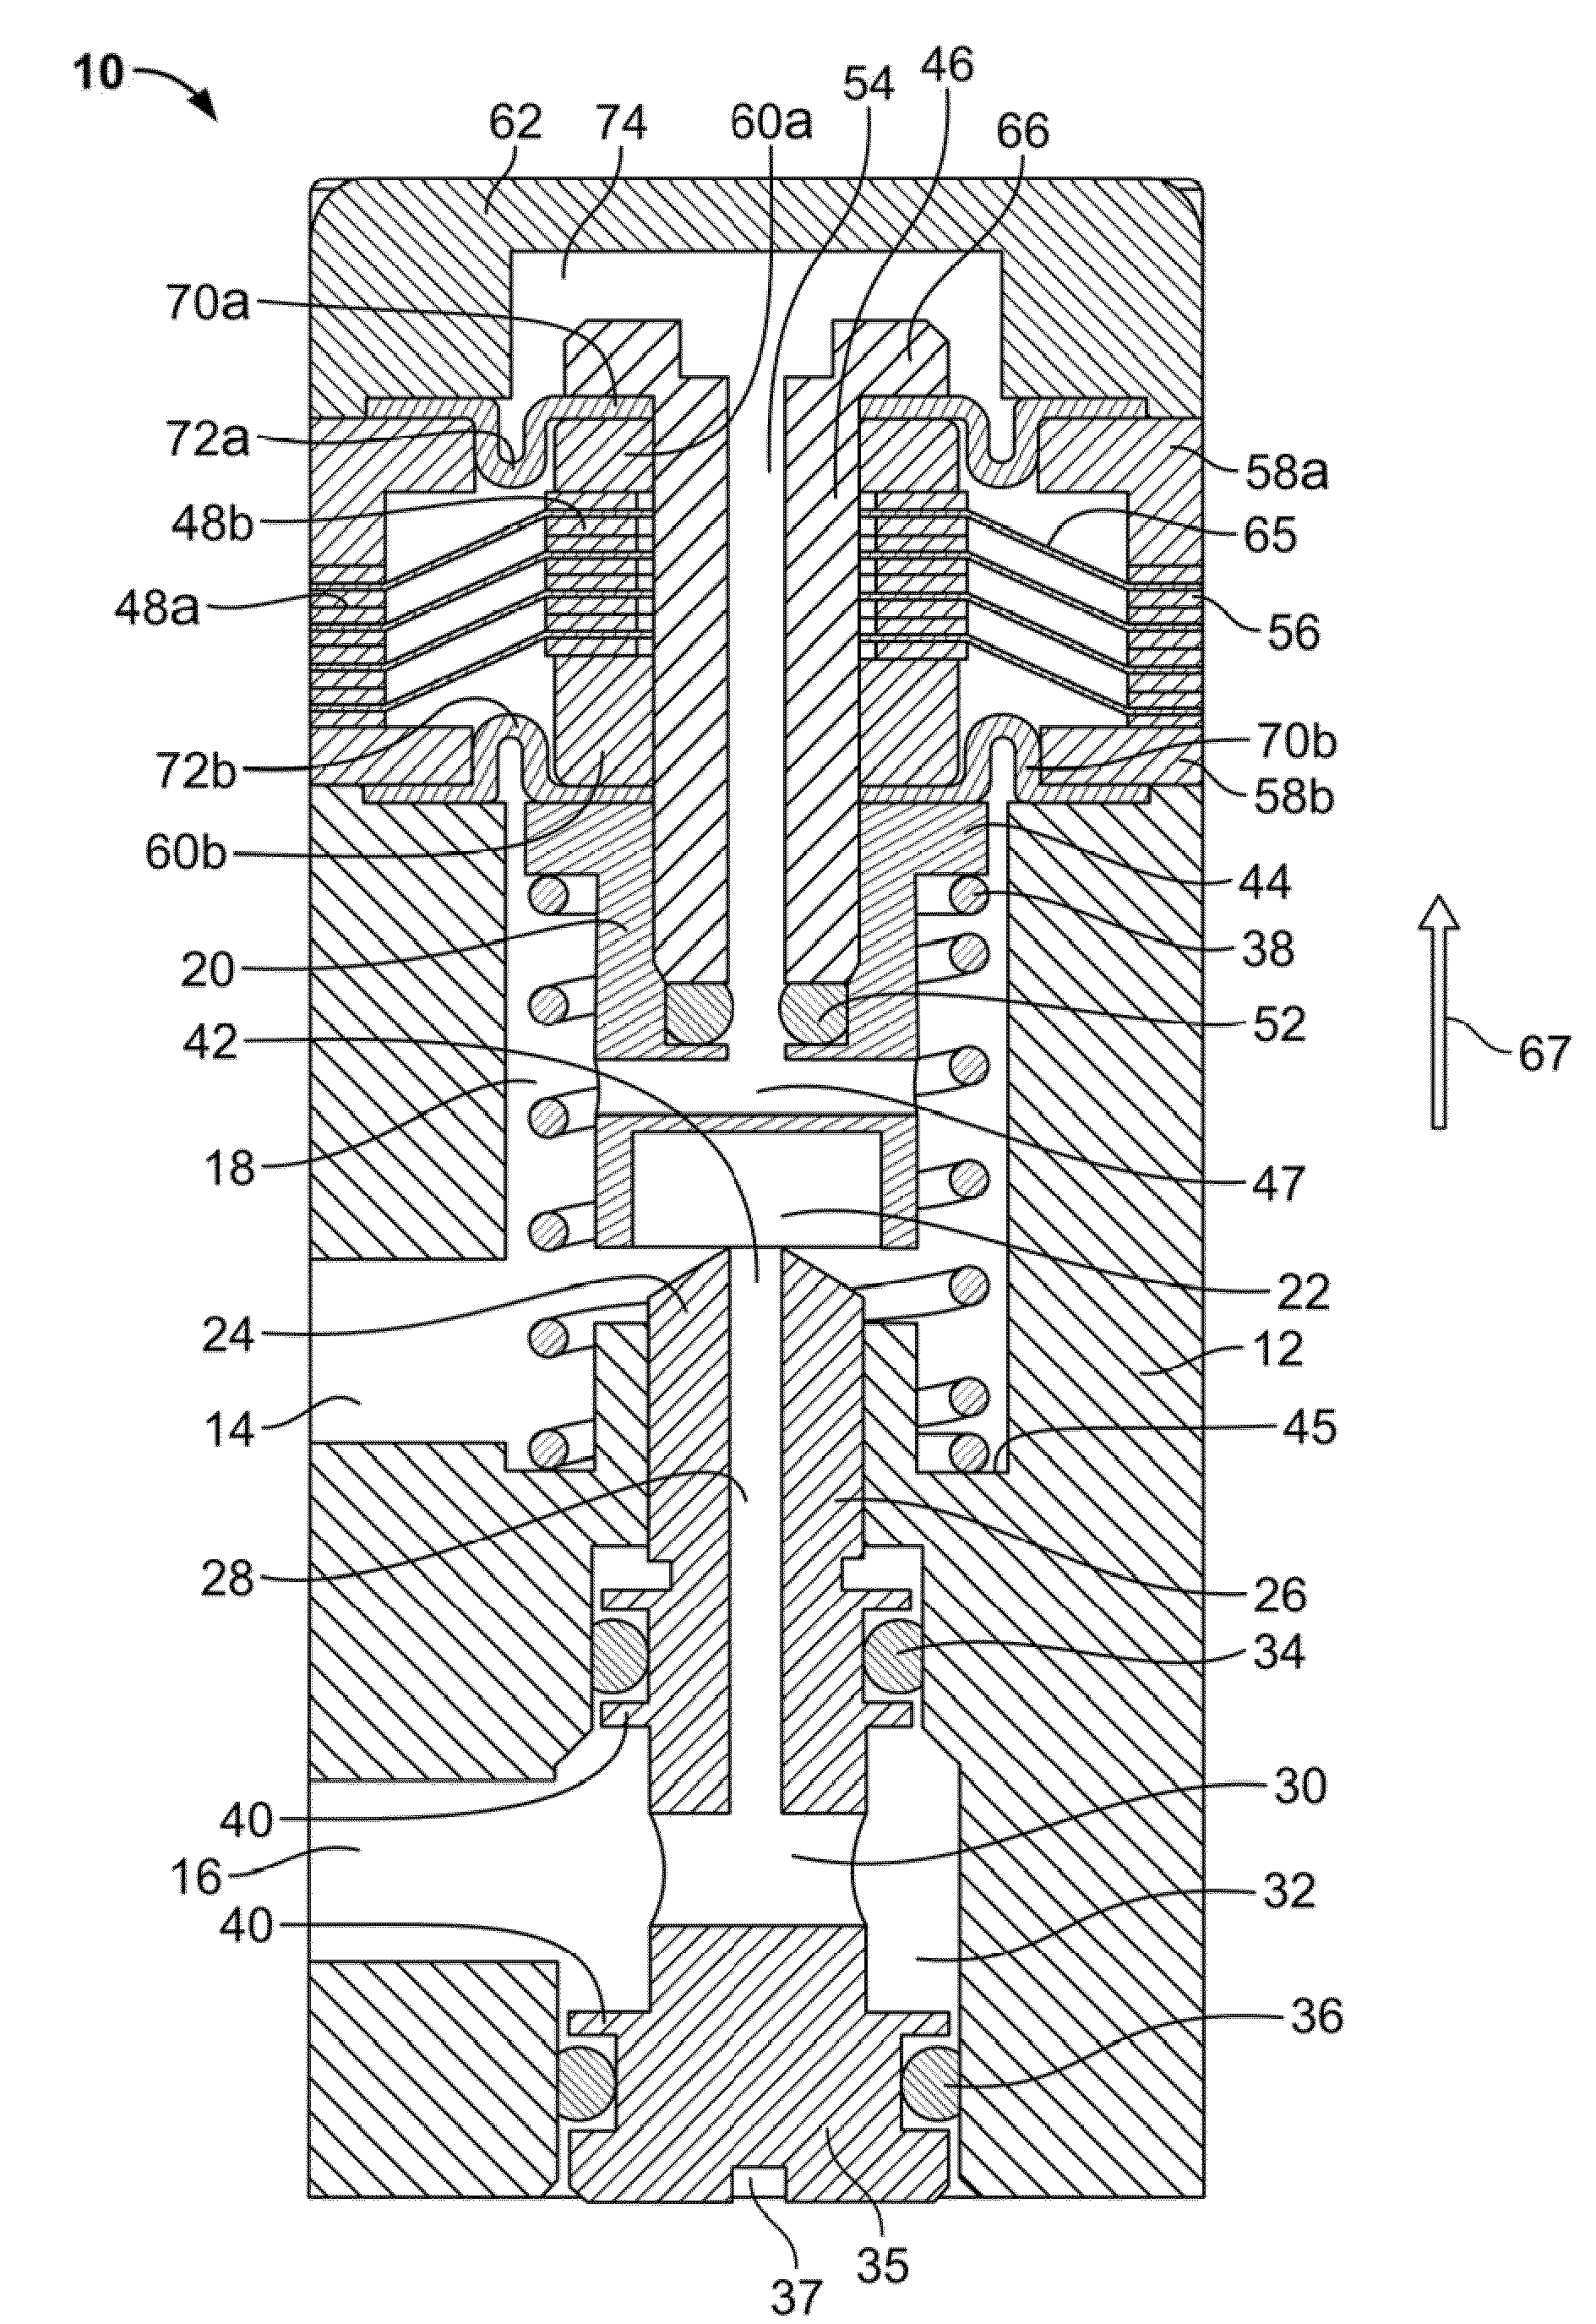 Fluid control systems employing compliant electroactive materials